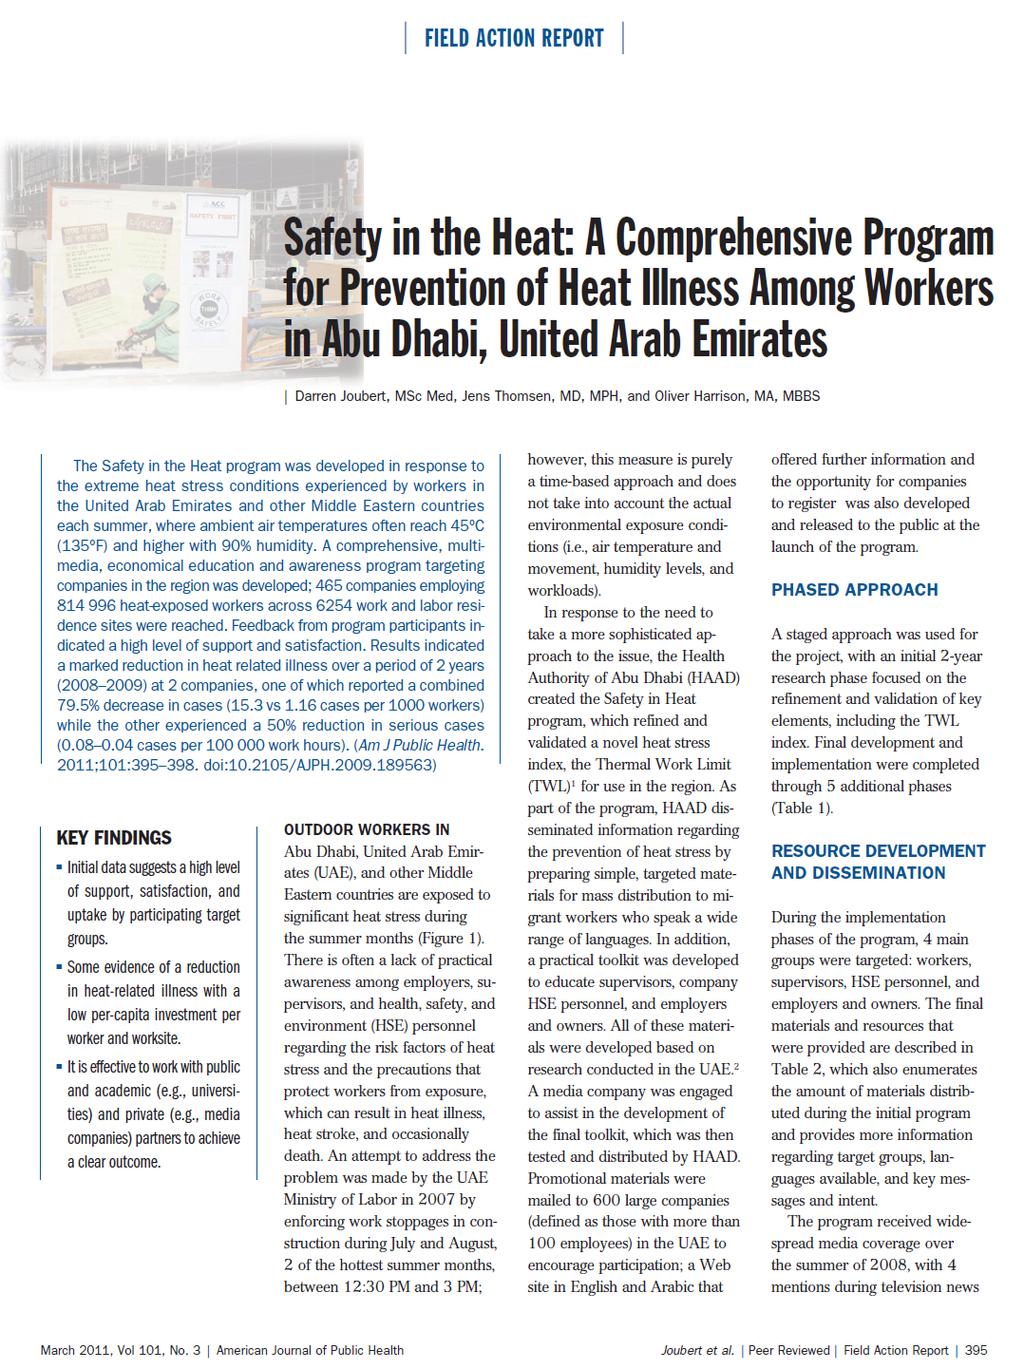 HAAD Safety in the Heat Program